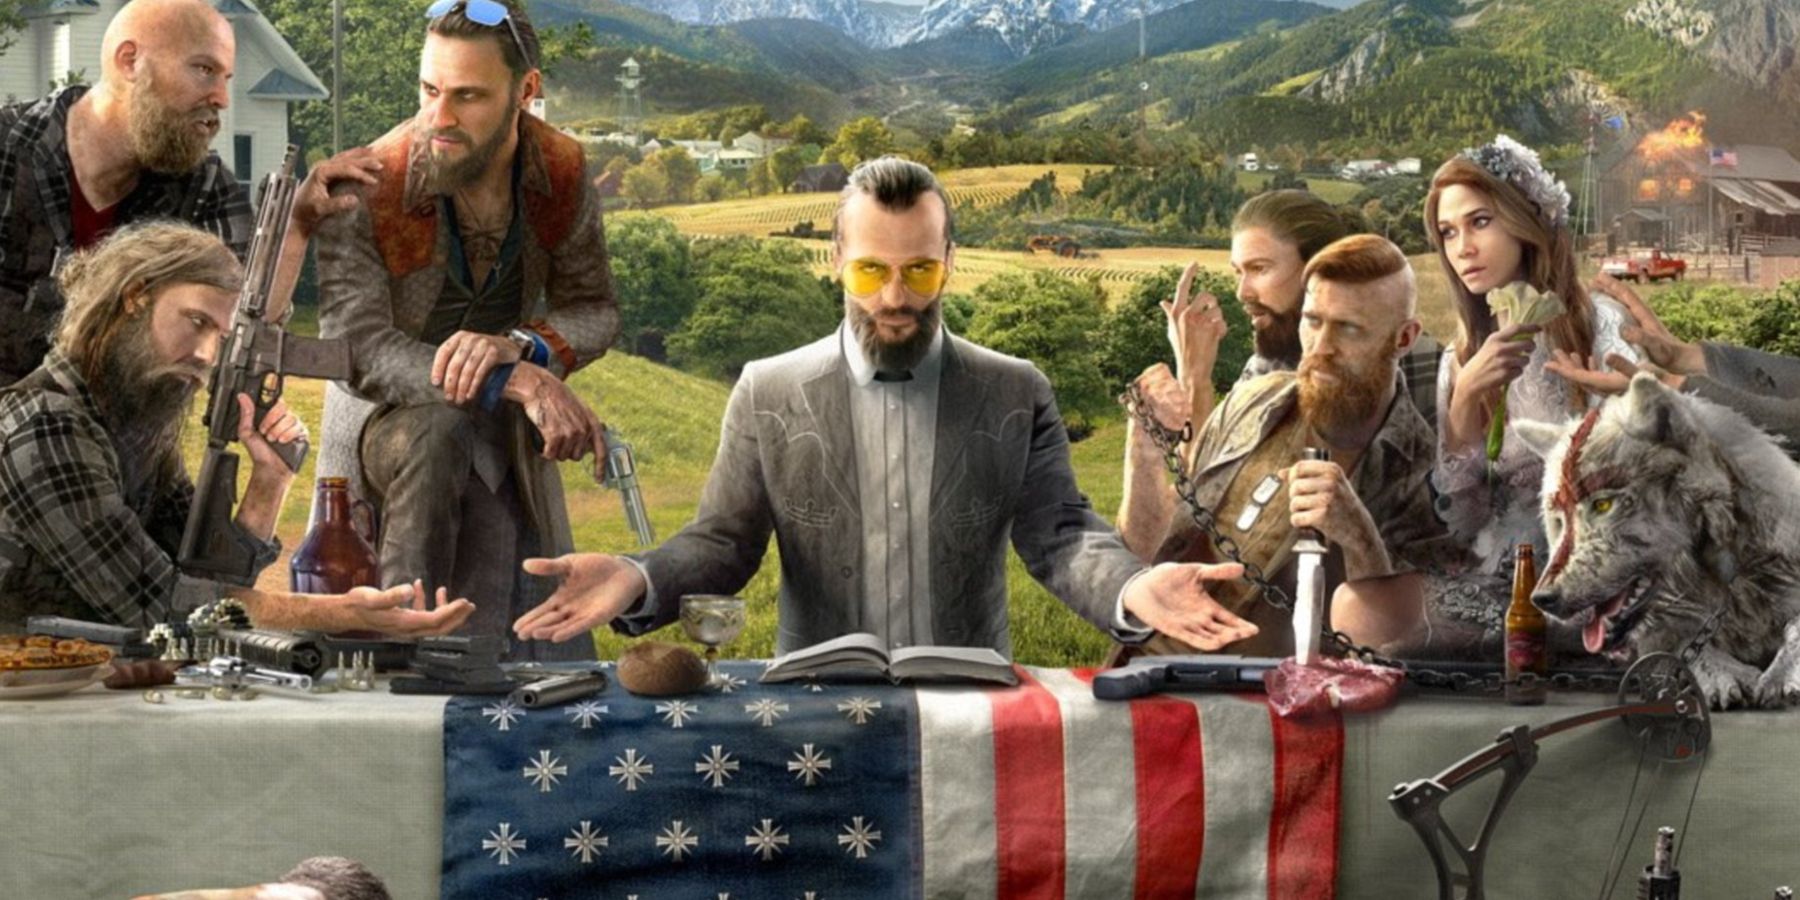 Far Cry 5 characters at table with American flag.